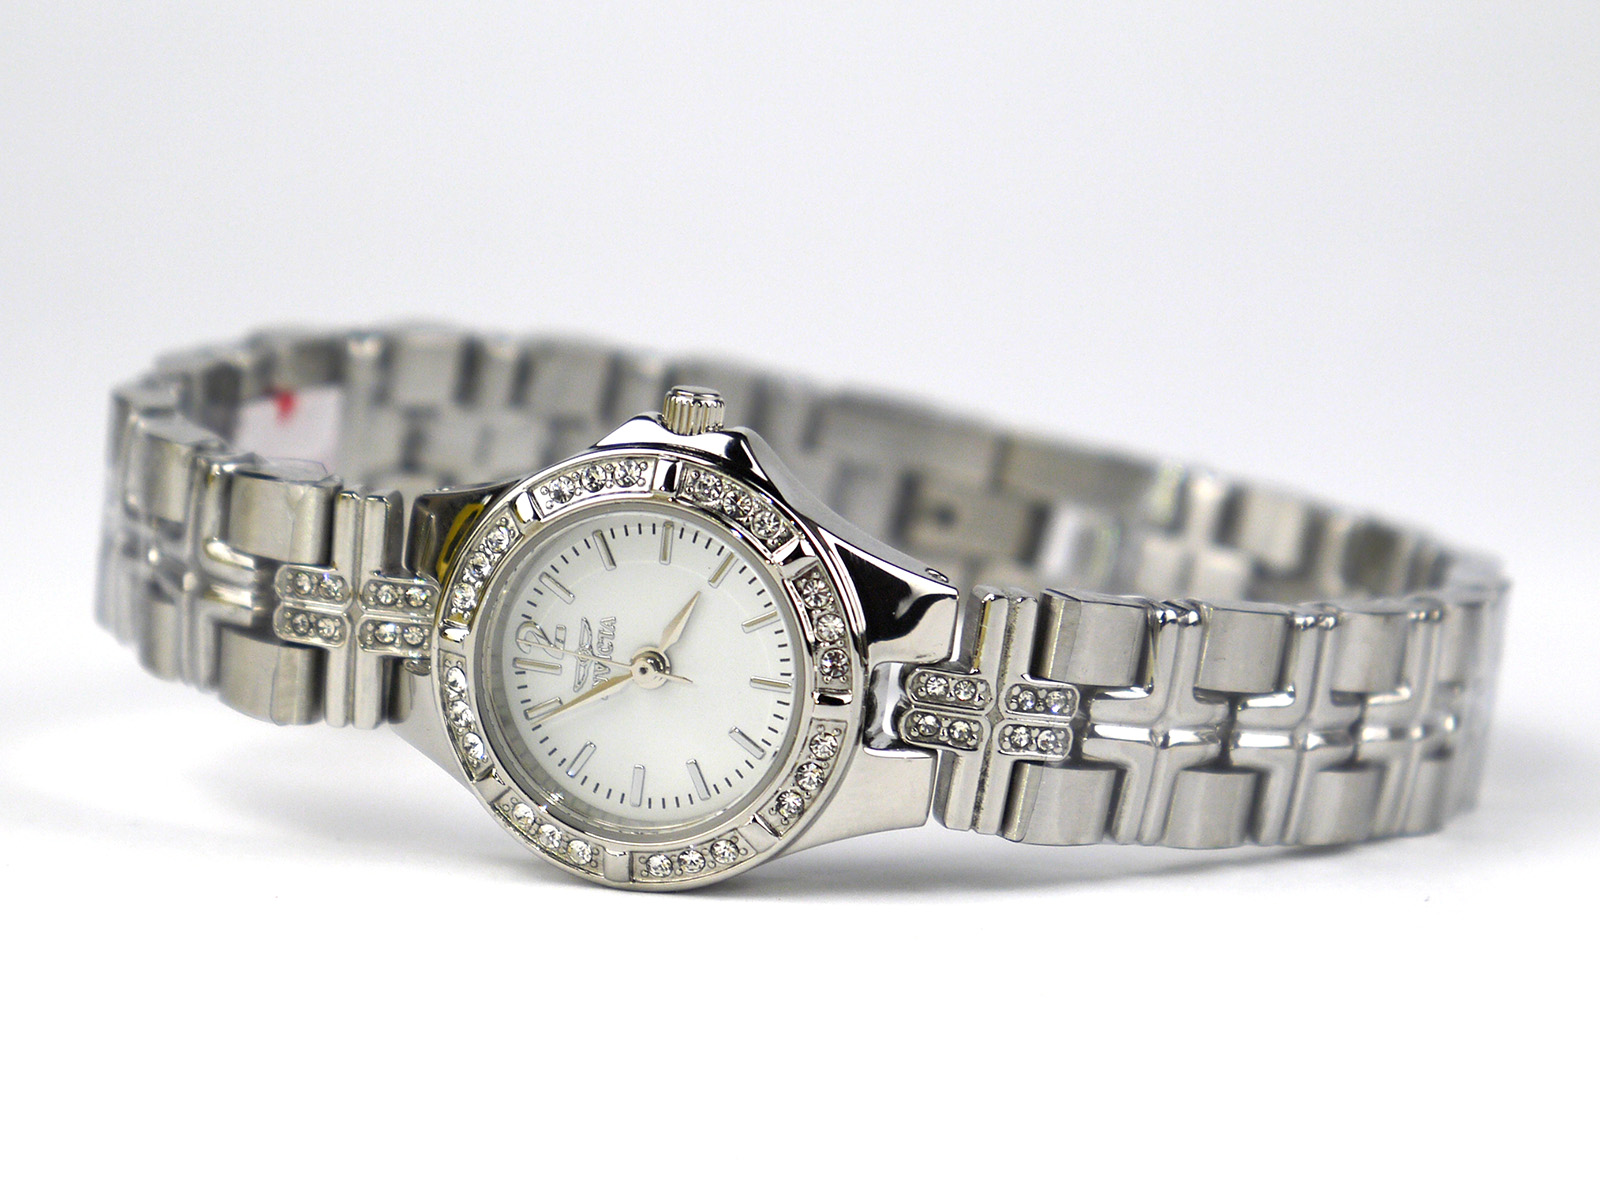 Invicta Women's 0126 II Collection Crystal-Accented Stainless Steel Watch